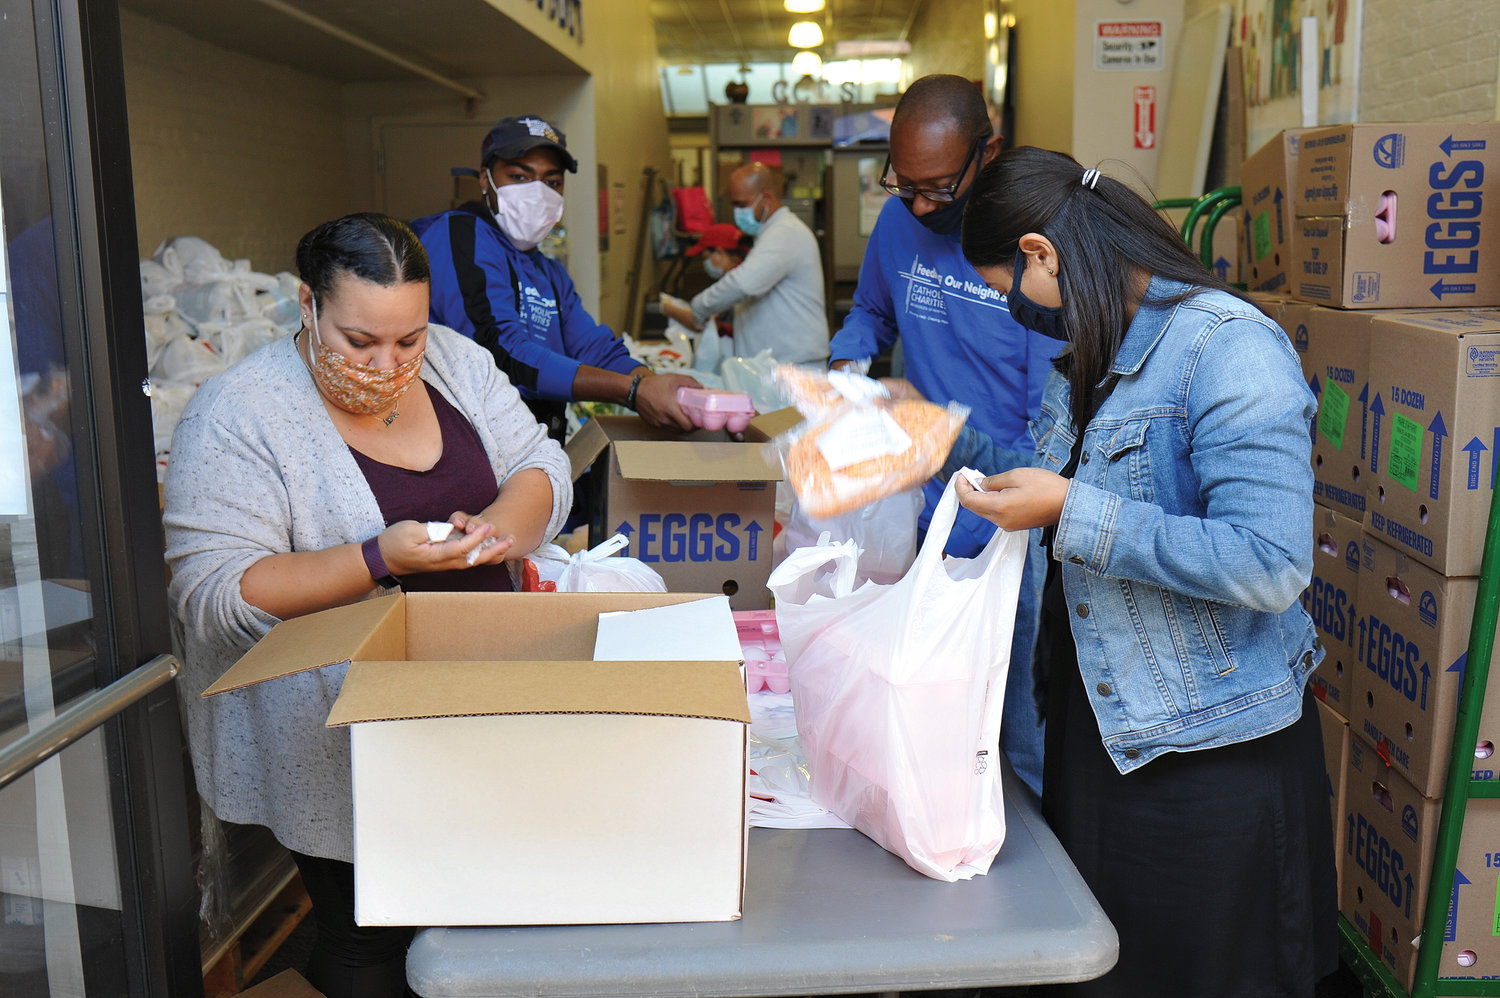 Staff and volunteers prepare the bags of food for distribution. Since the beginning of the coronavirus pandemic in March, Catholic Charities has distributed 1 million meals, more than double the number it has provided during the same period in recent years.